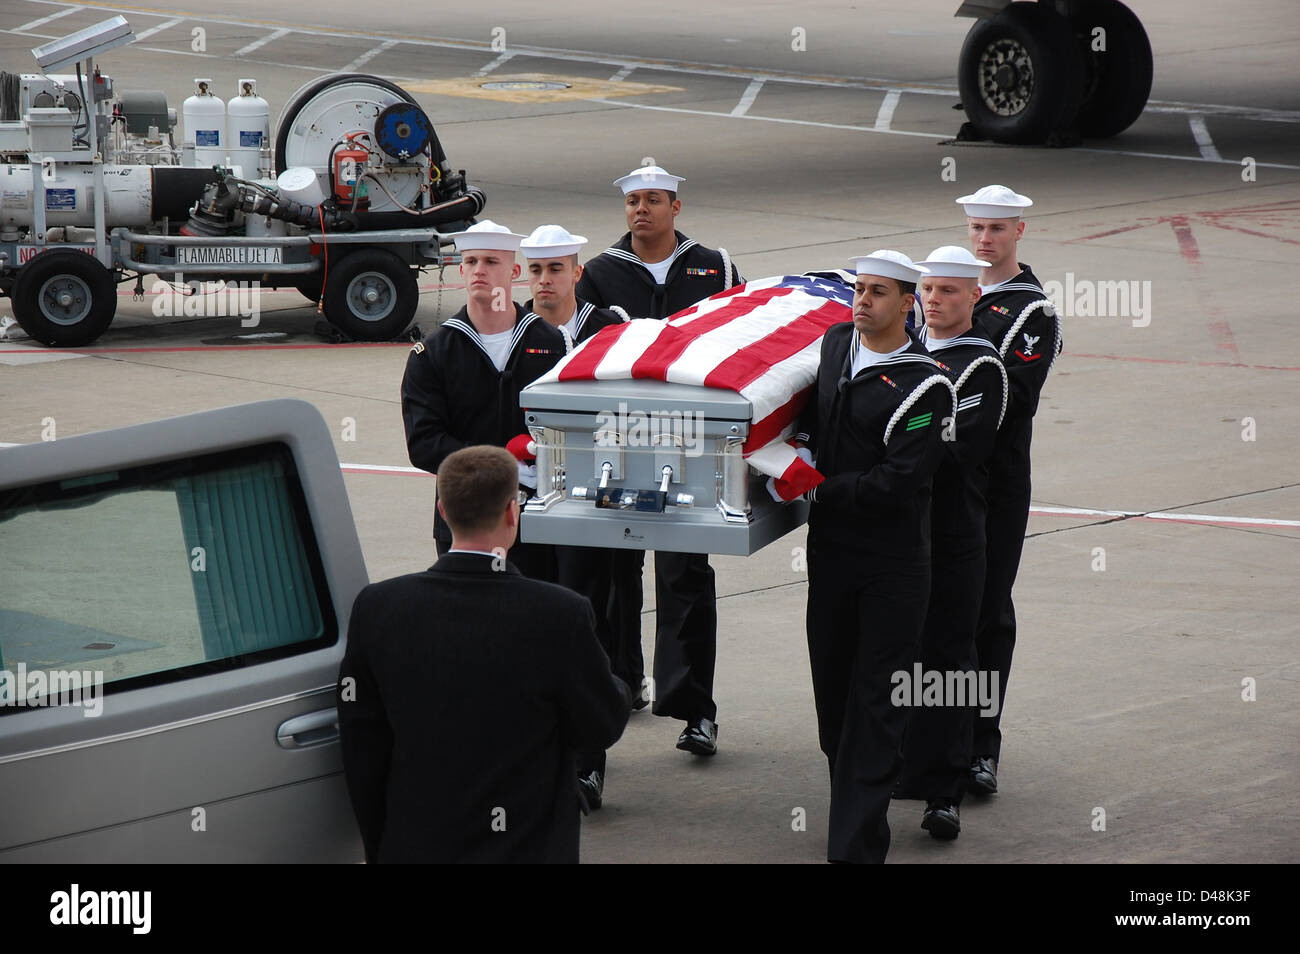 Members of the US Navy Ceremonial Guard conduct a dignified transfer of remains ceremony at Washington Dulles International Airport for one of two Sailors recovered from the Civil War ironclad USS Monitor March 6, 2013 in Sterling, Virginia. The Monitor sank off Cape Hatteras, NC in 1862. The two Sailors will be interred with full military honors at Arlington National Cemetery. Stock Photo